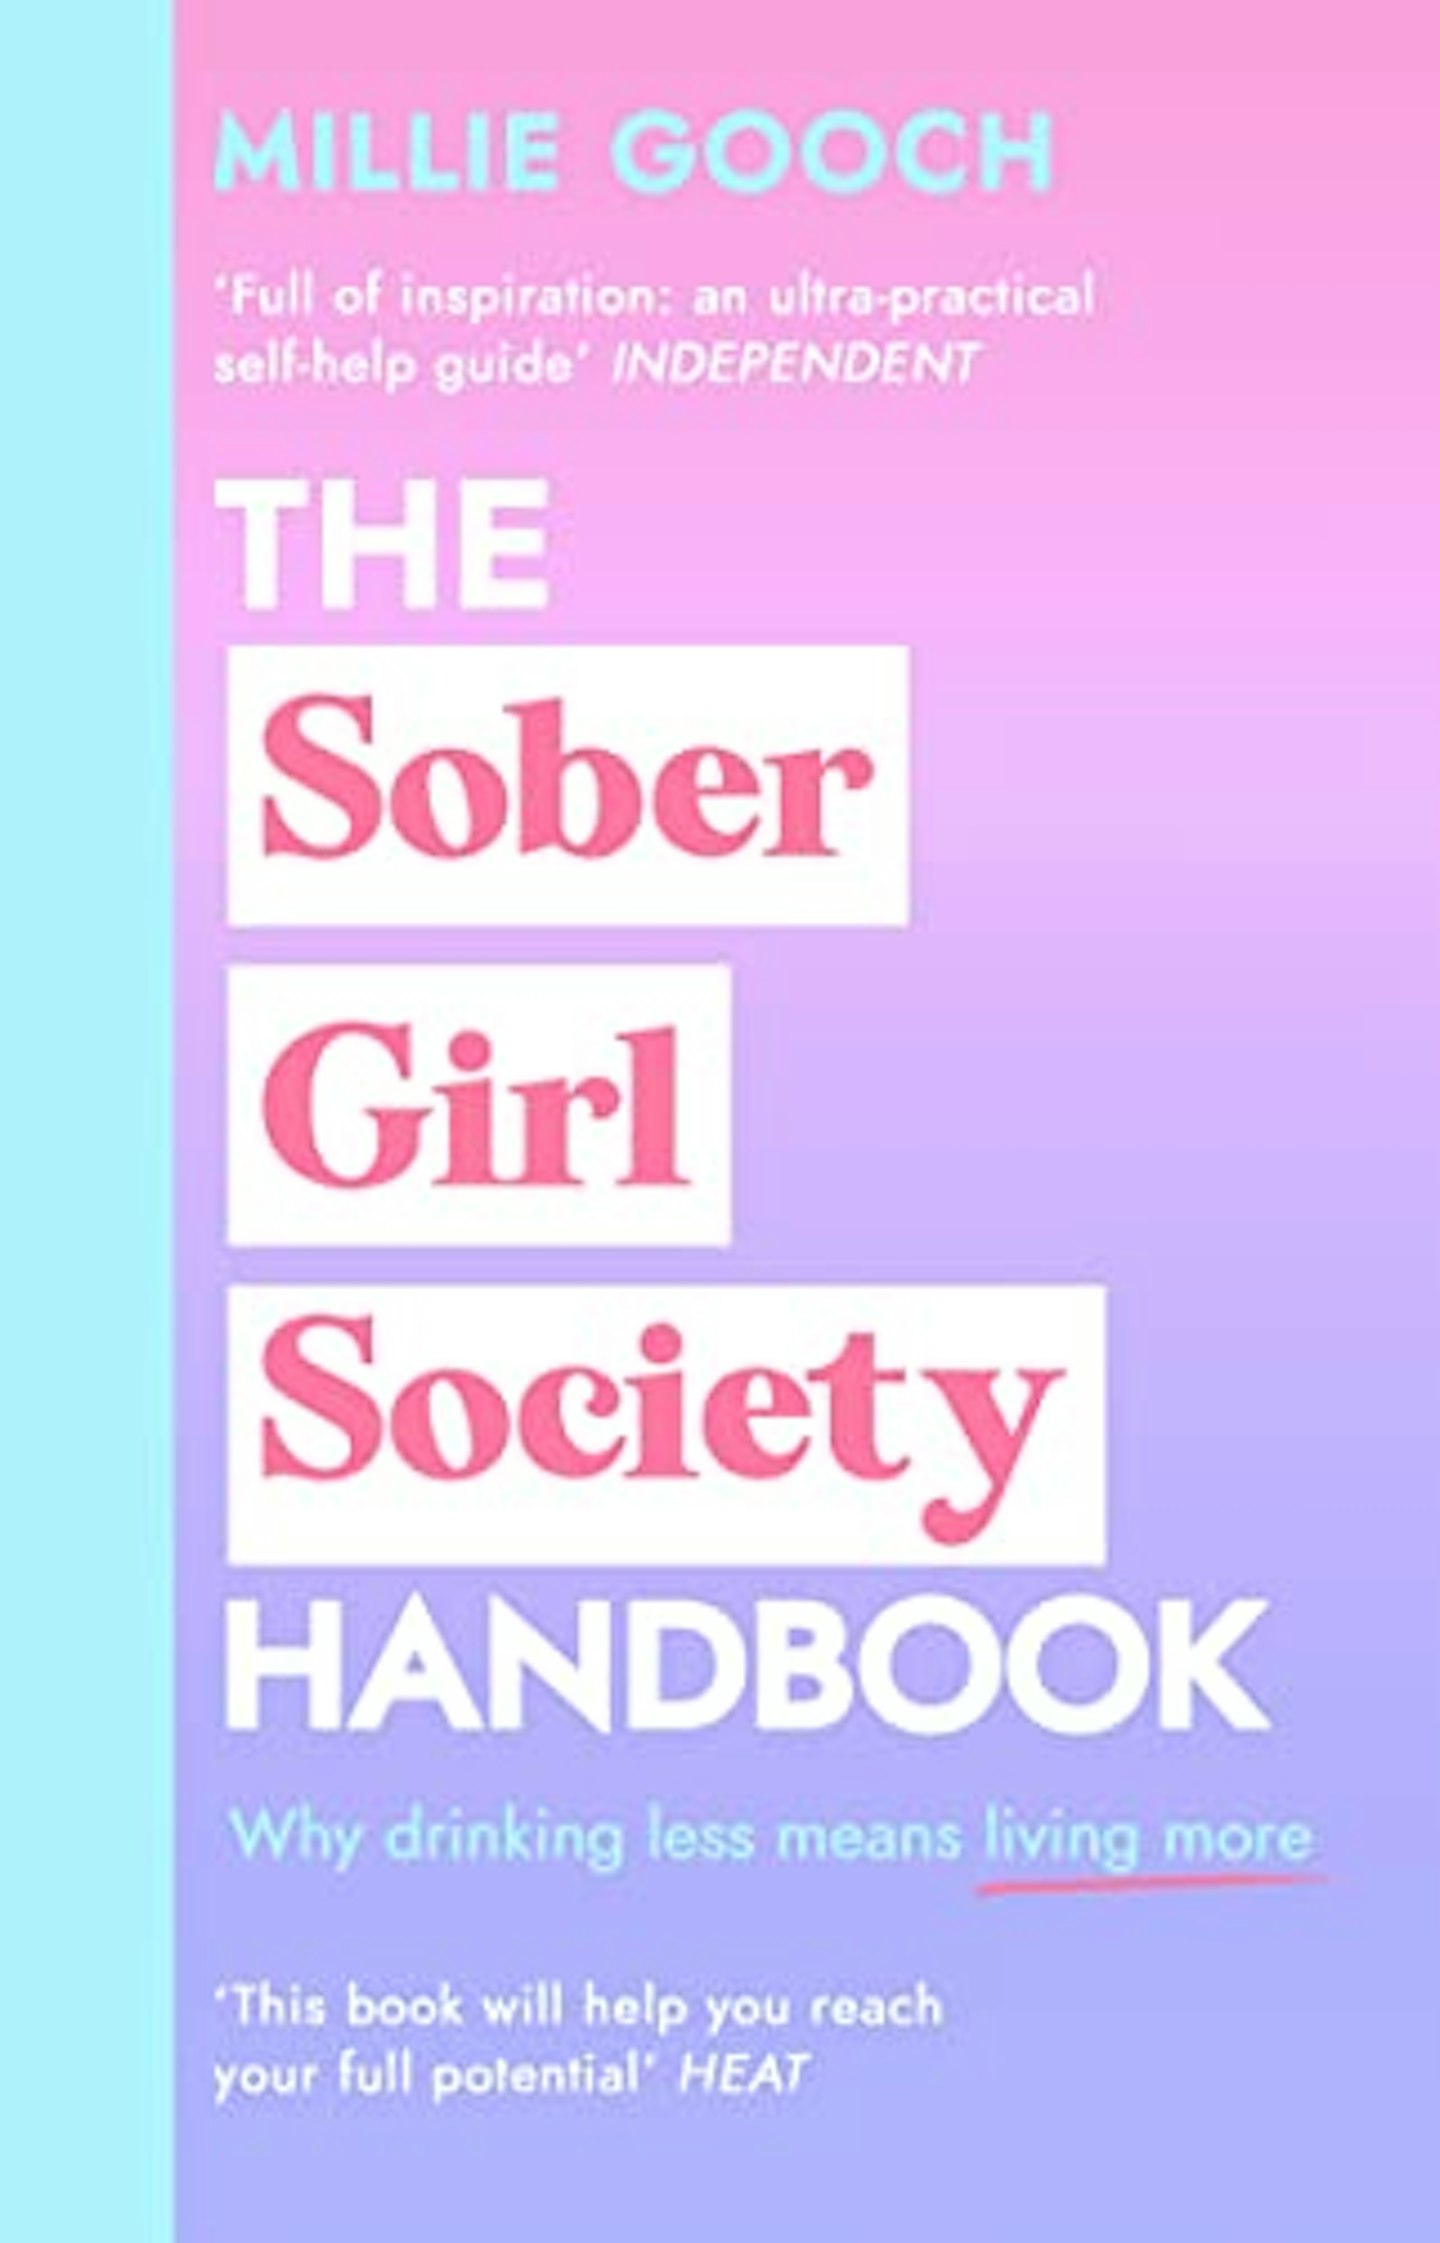 The Sober Girl Society Handbook: Why drinking less means living more